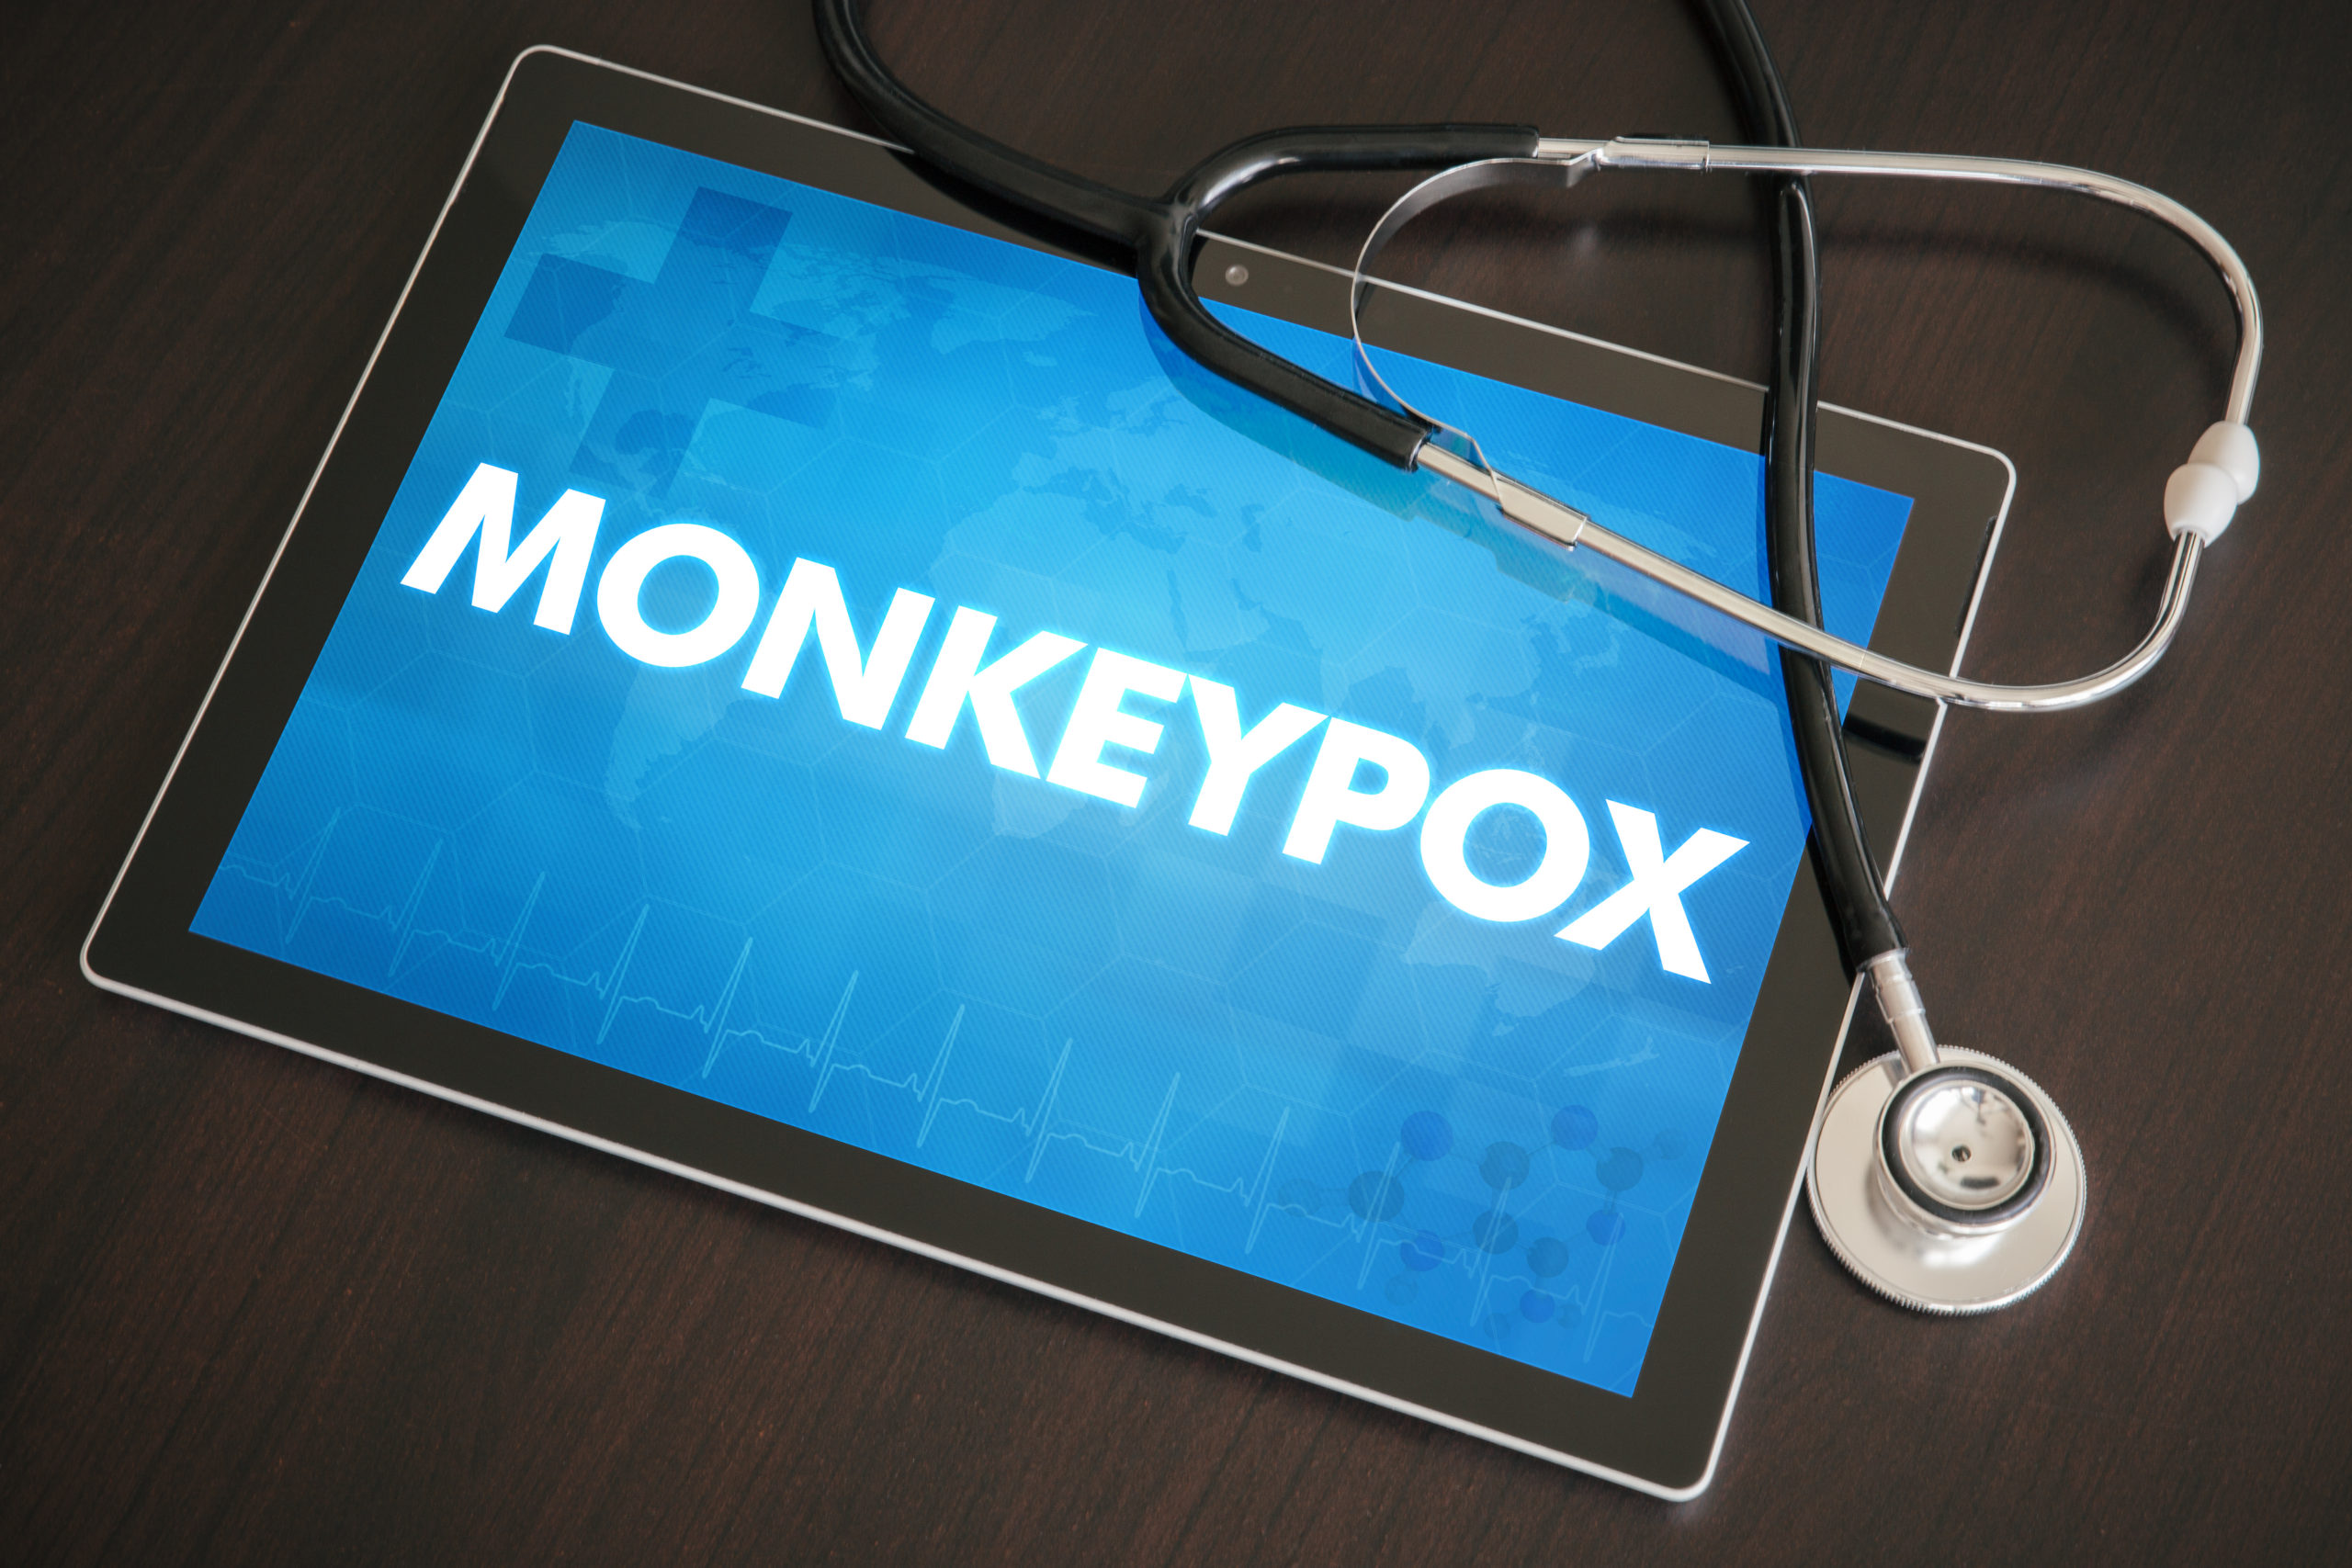 "Monkeypox" on an iPad screen with a stethoscope next to it